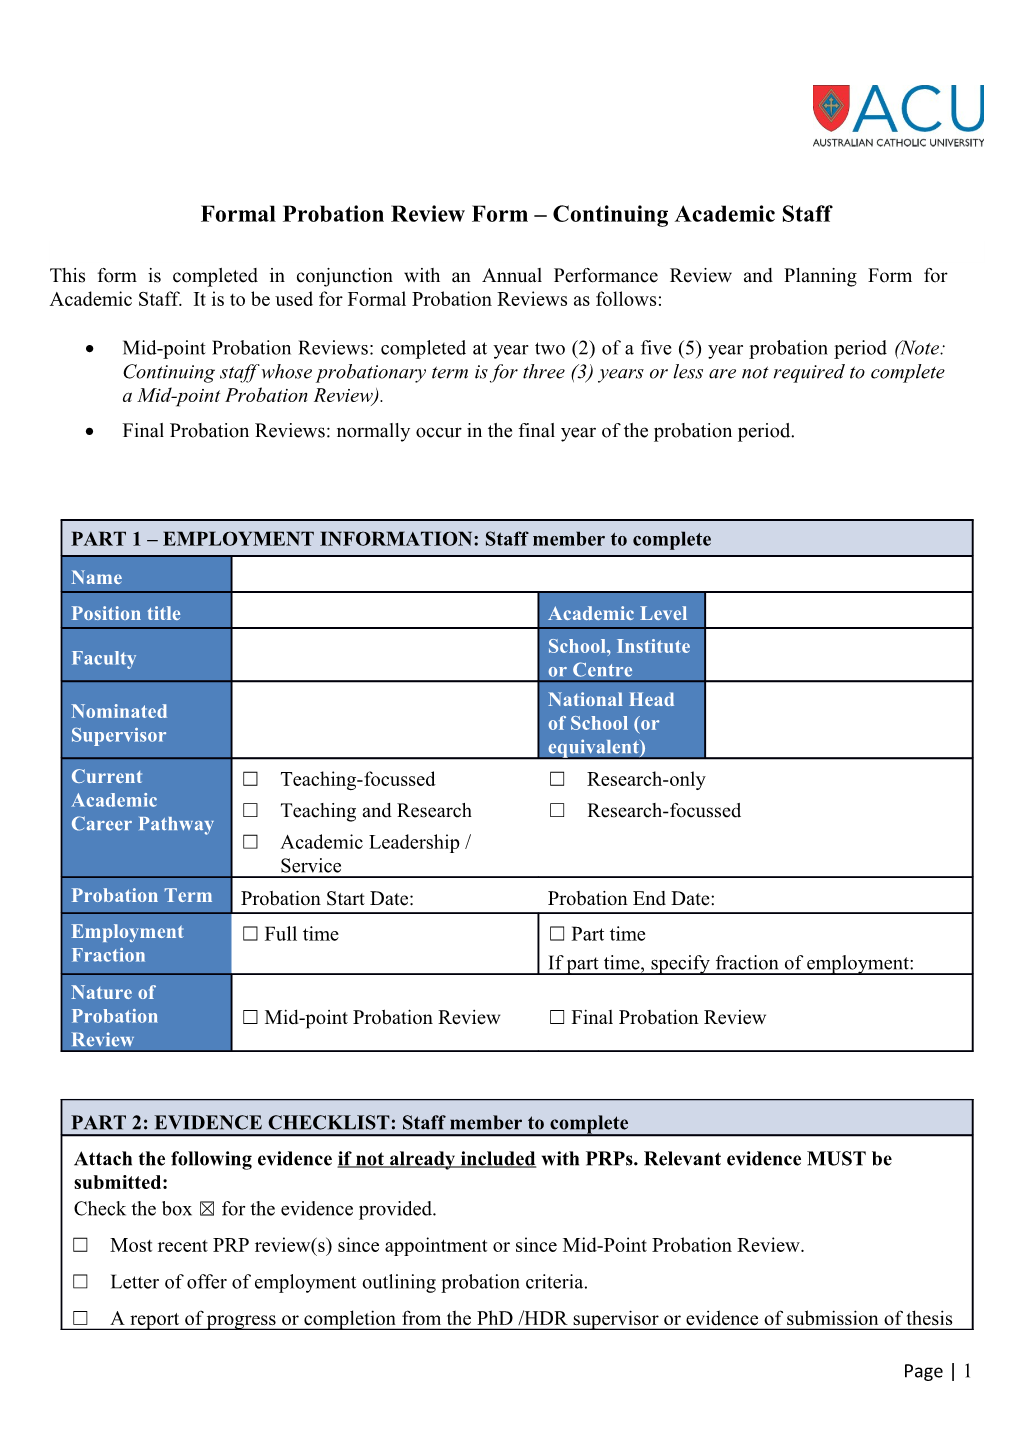 Formal Probation Review Form Continuing Academic Staff